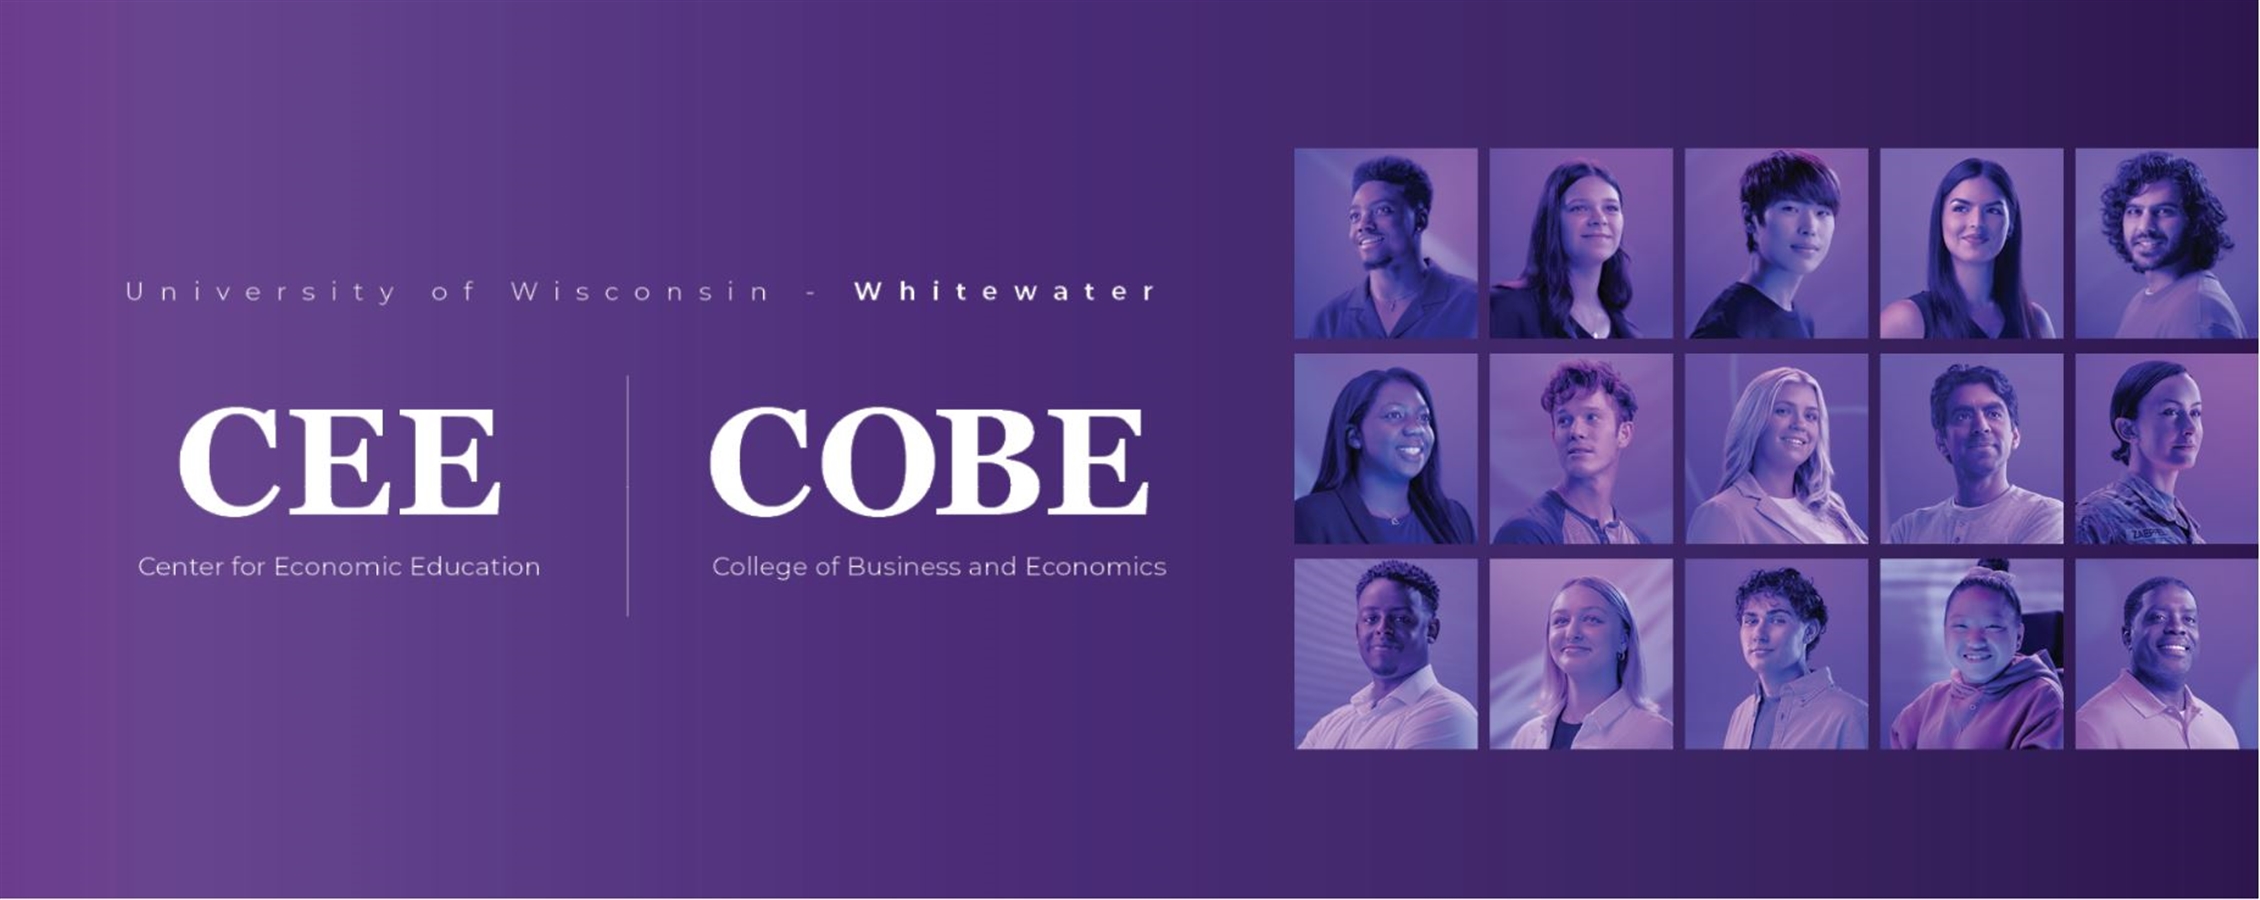 Bridging the University of Wisconsin-Whitewater and local High Schools through economics.